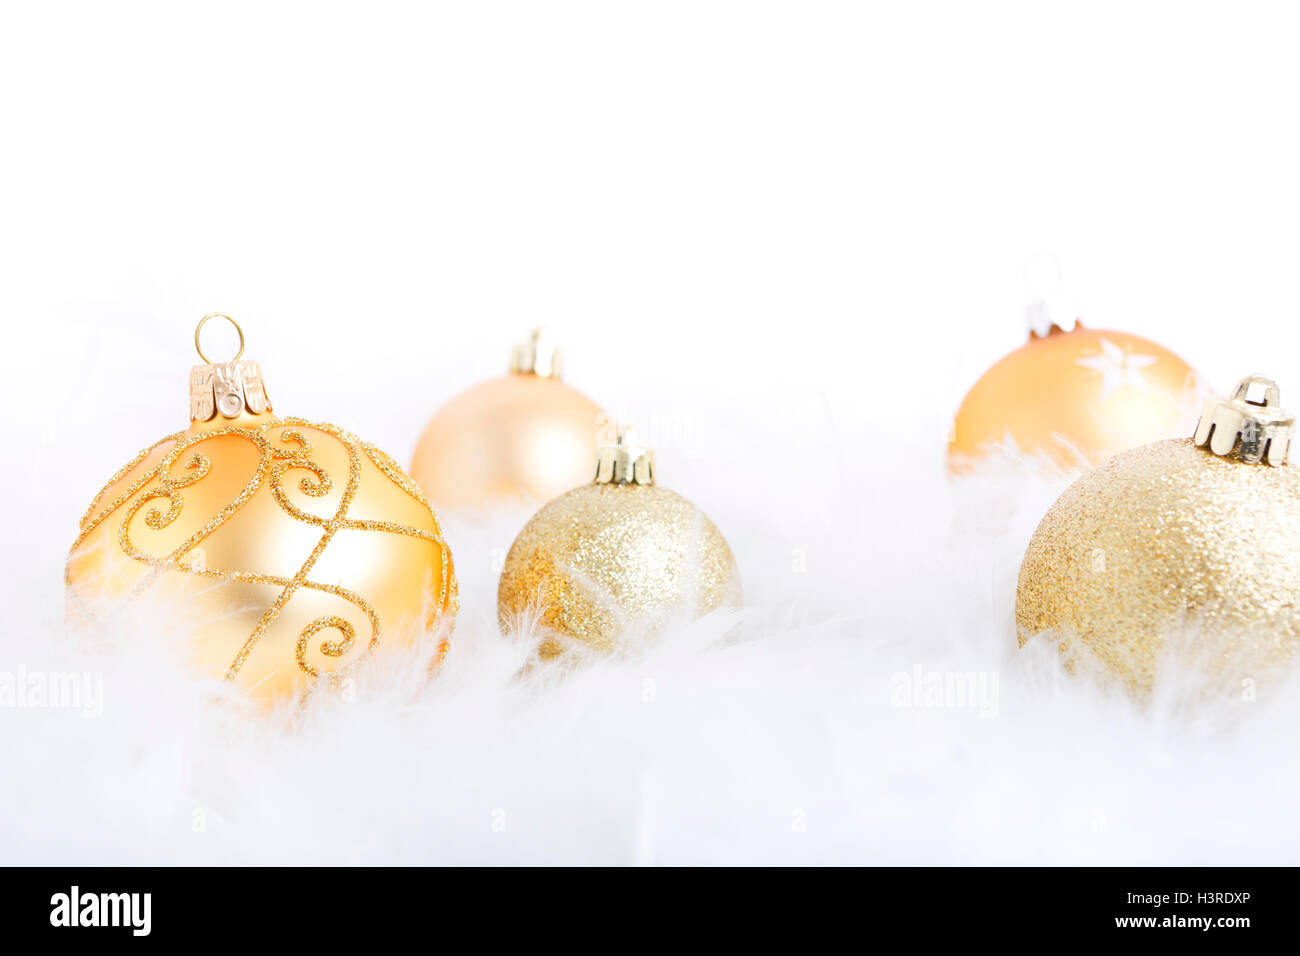 Golden Christmas baubles on a soft feathery surface with a white background. Stock Photo